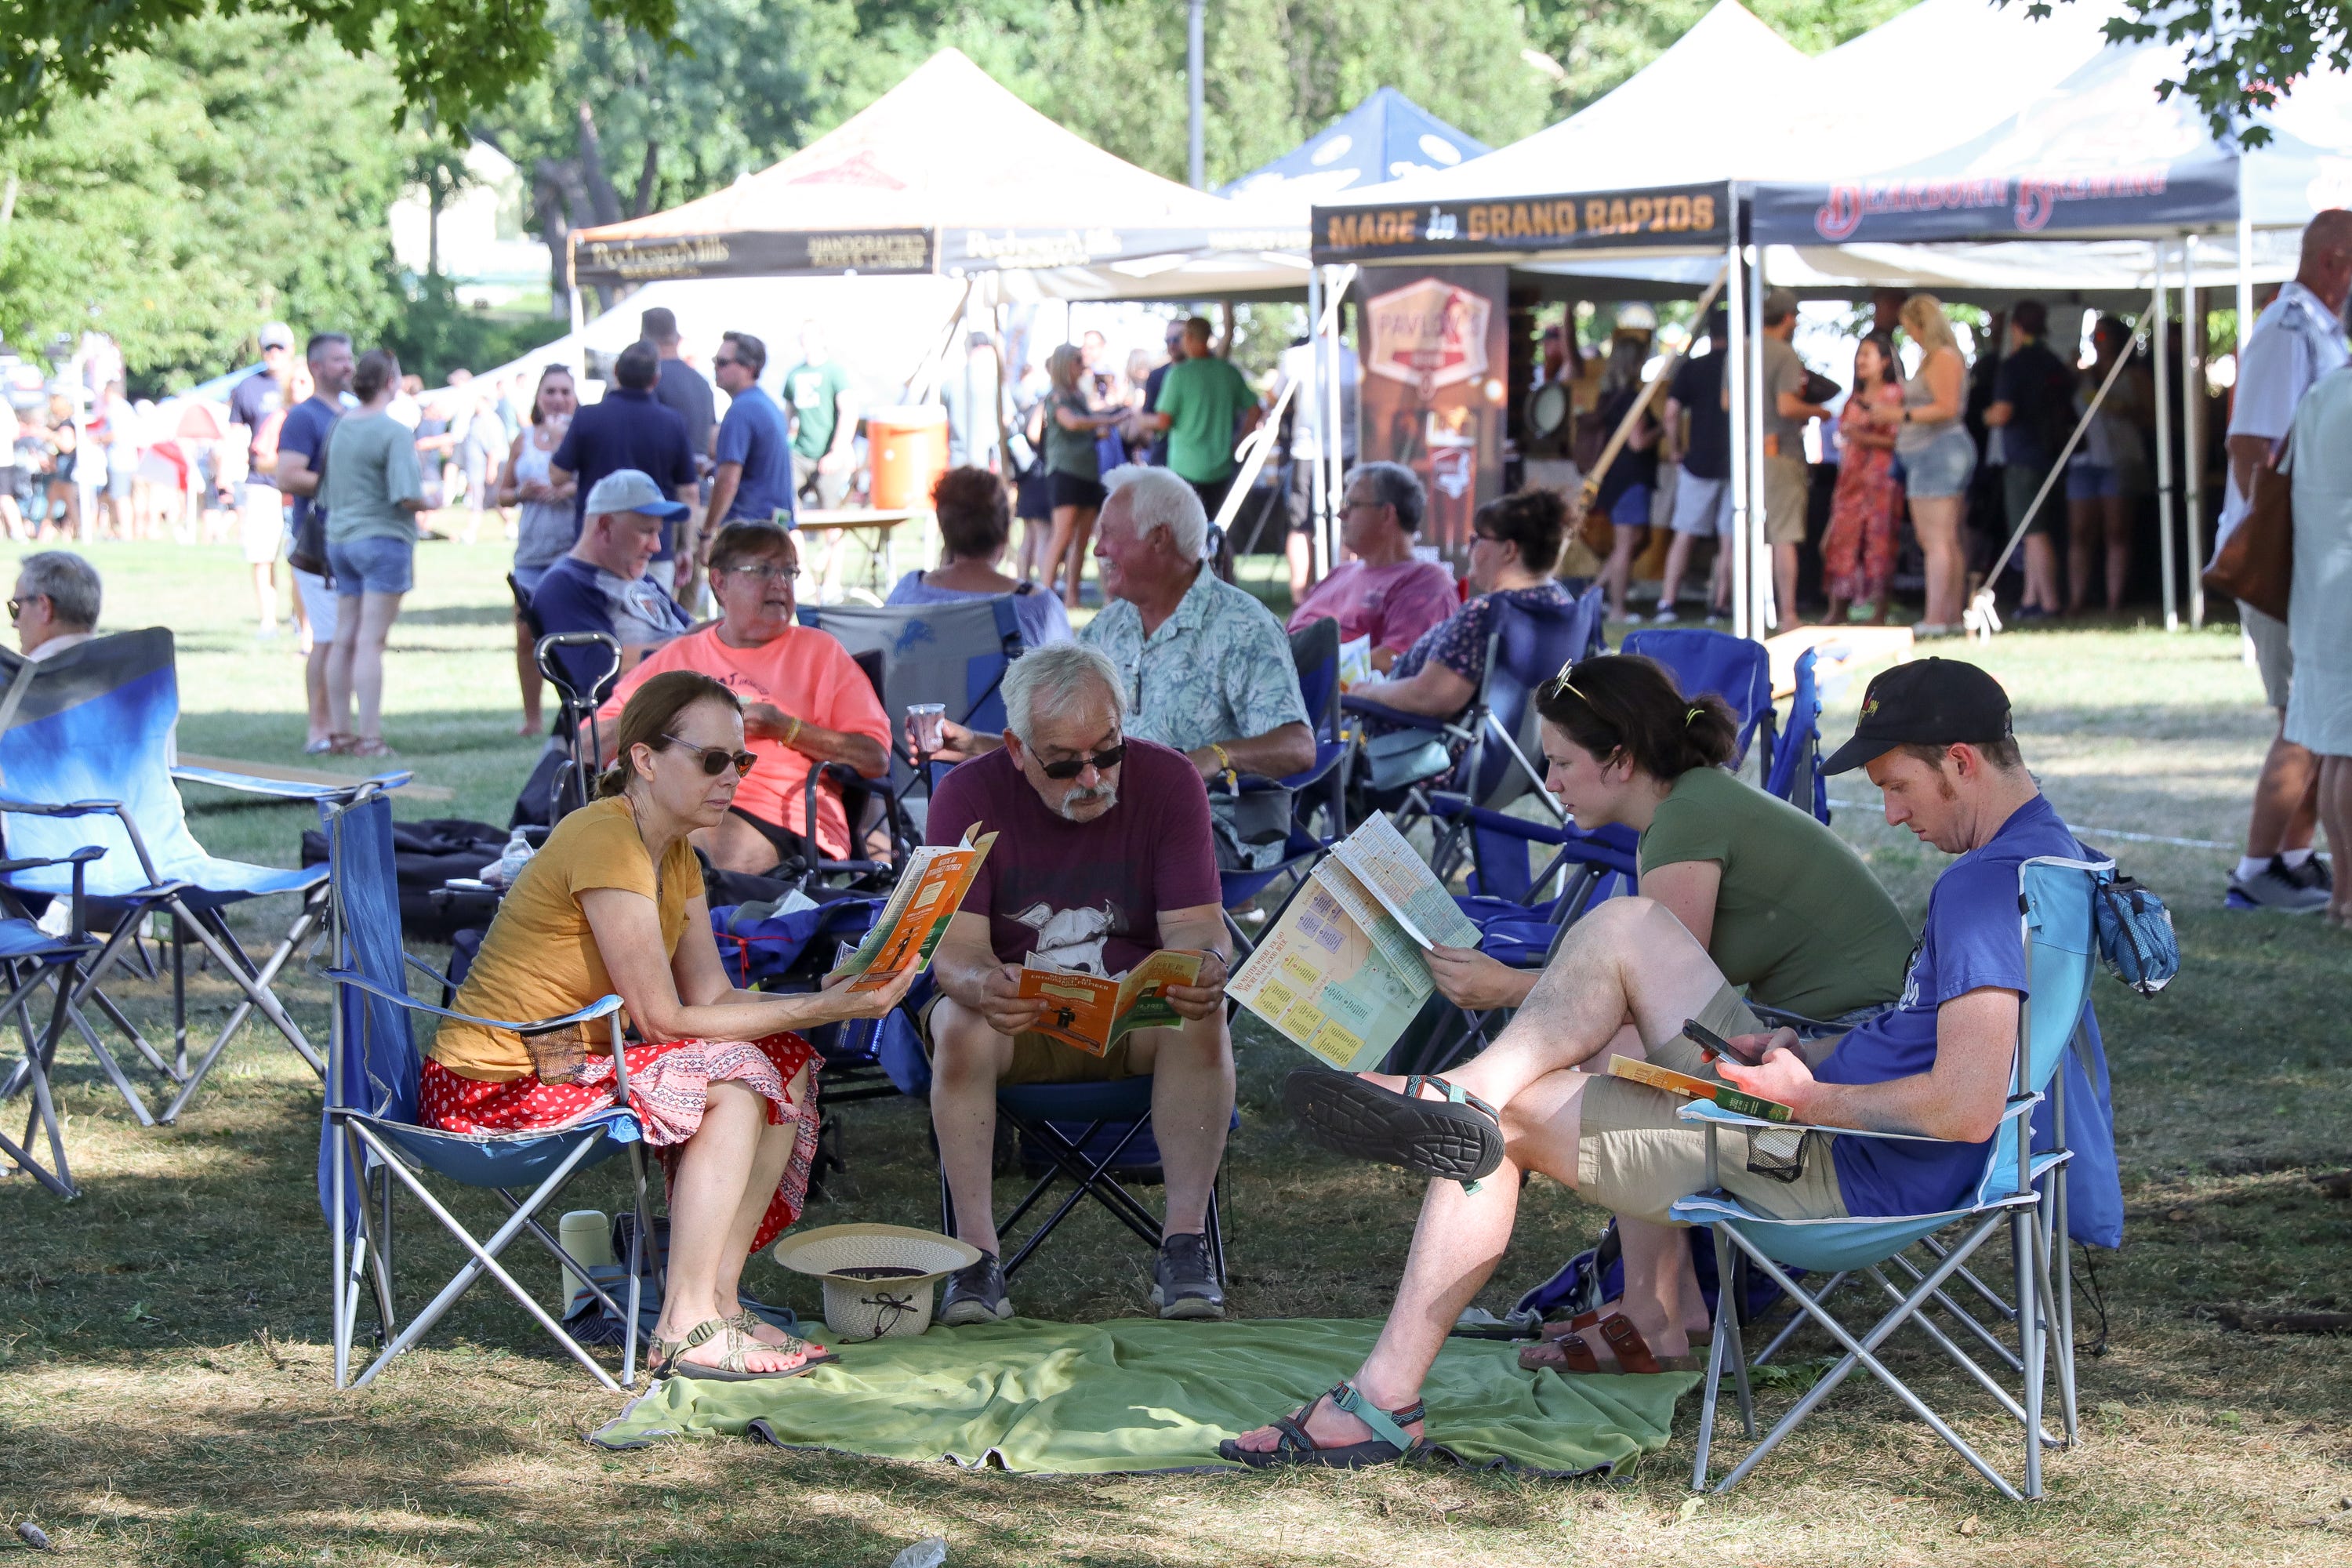 A group of Summer Beer Festival patrons looks over the event program to scout out their next beer choice on Friday, July 22, 2022.